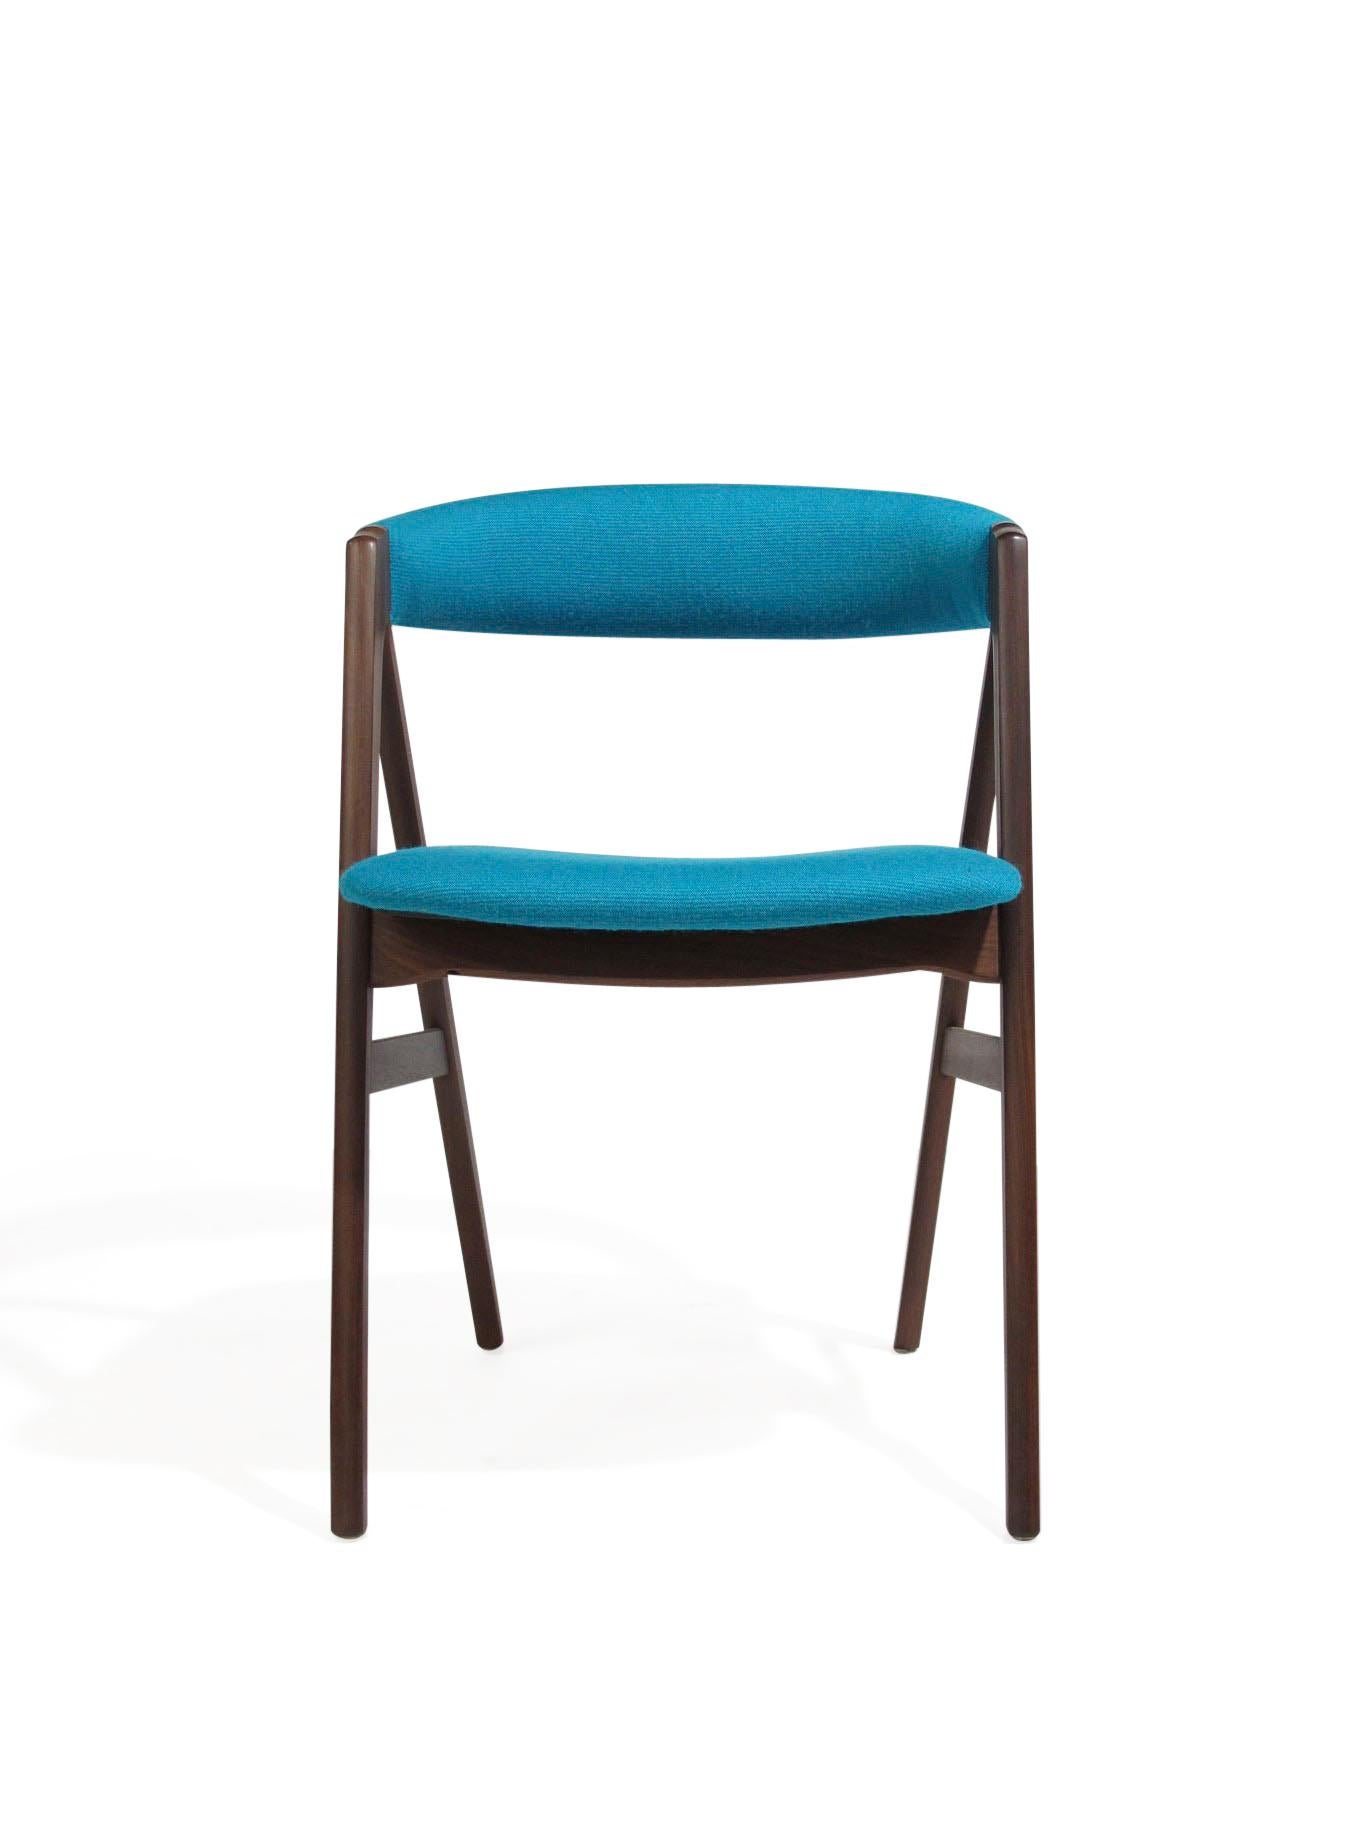 Scandinavian Modern A-Frame Danish Dining Chairs in Turquoise Wool